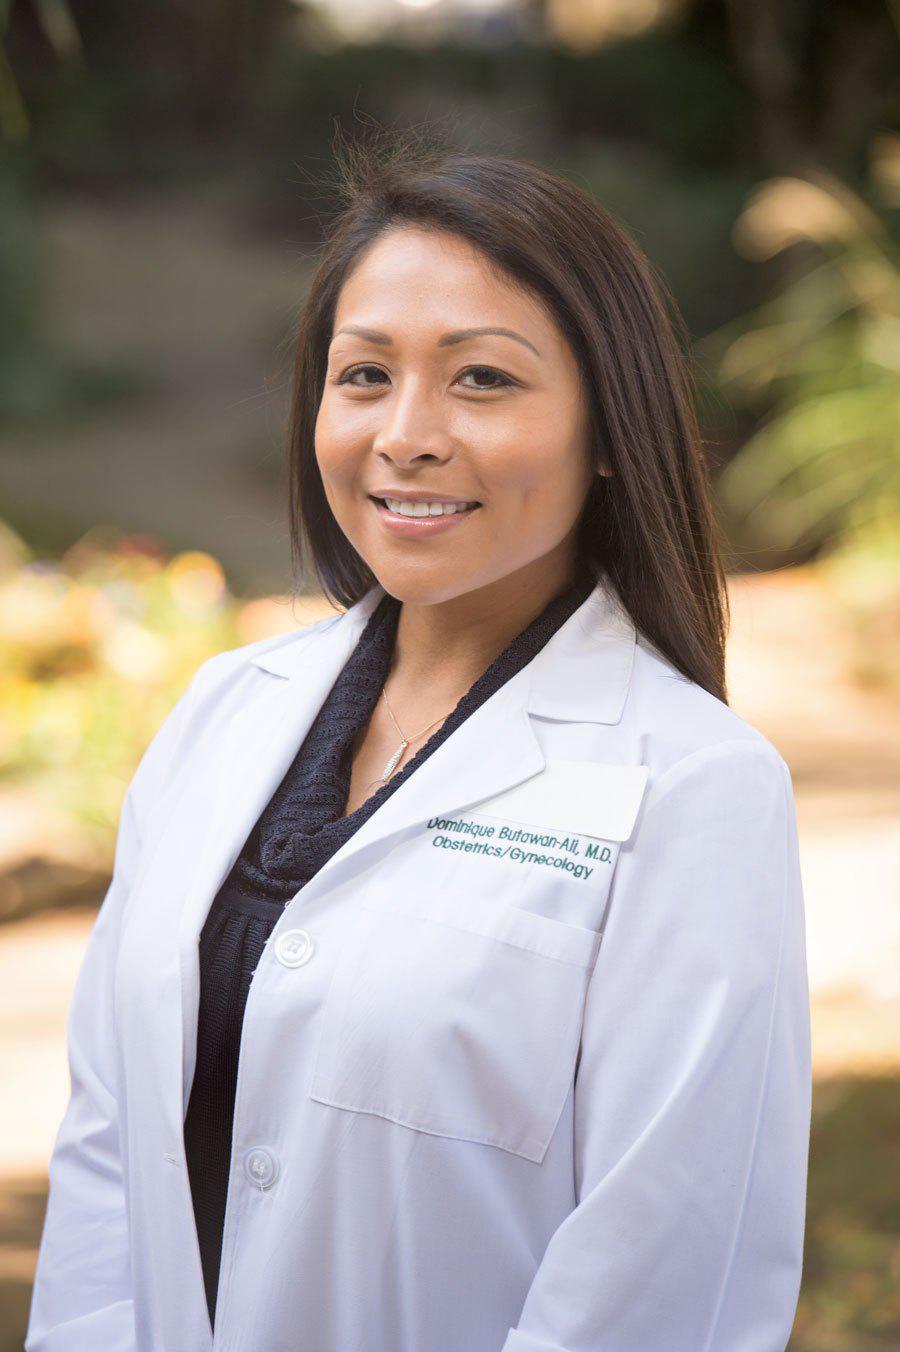 Dr. Dominique Butawan-Ali - board-certified obstetrician and gynecologist